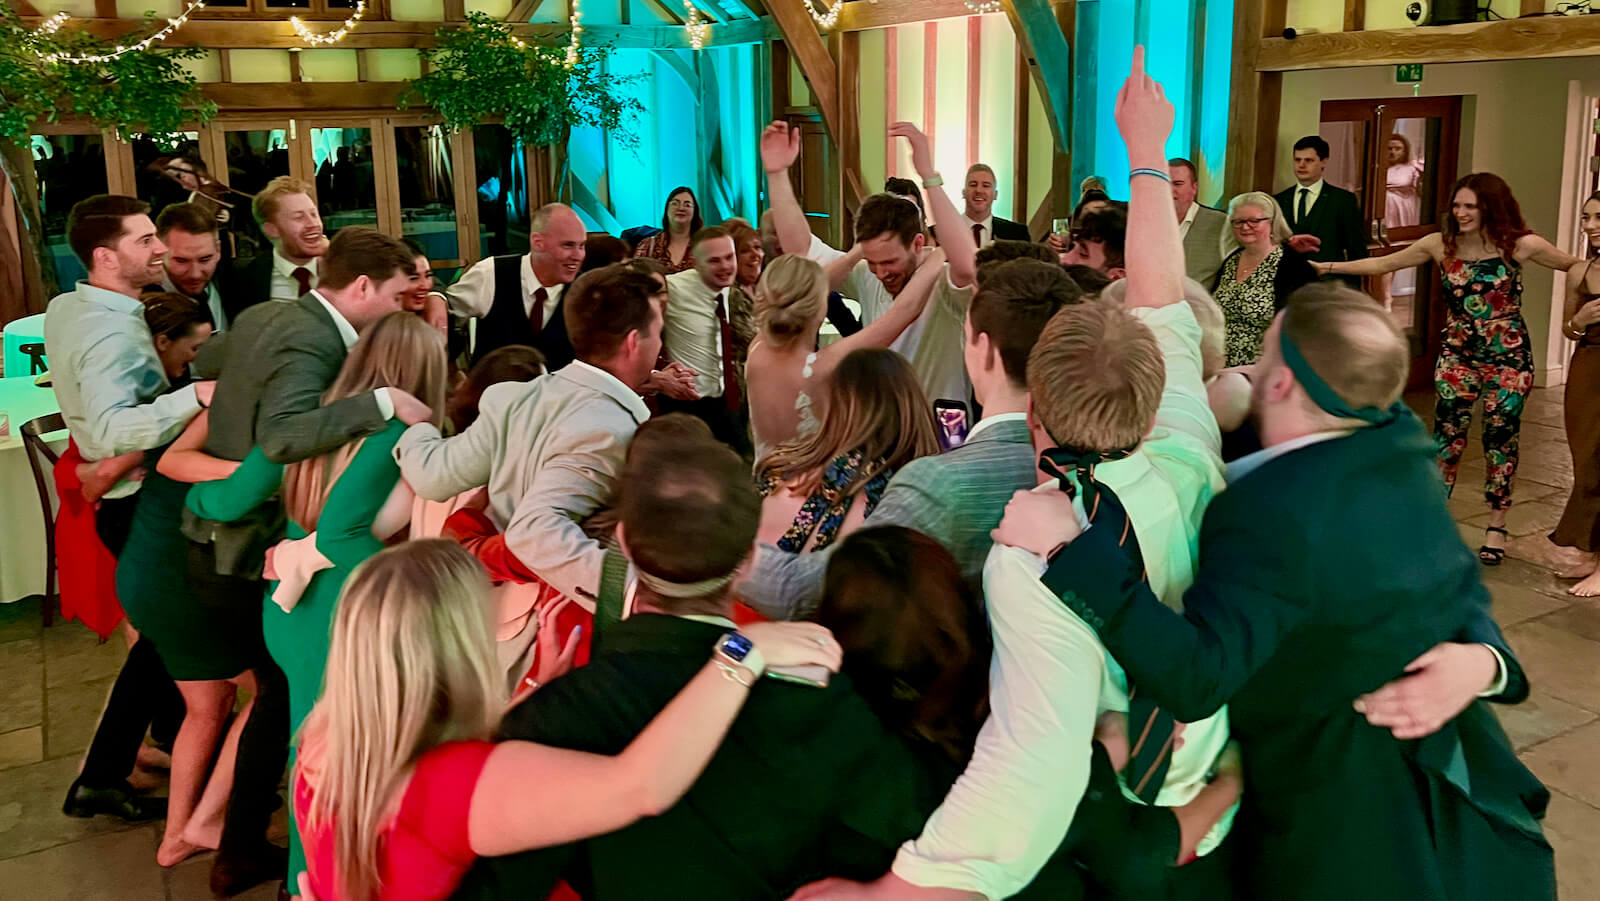 wedding at Brookfield Barn, a full dance floor of guests and family dancing with the bride and groom